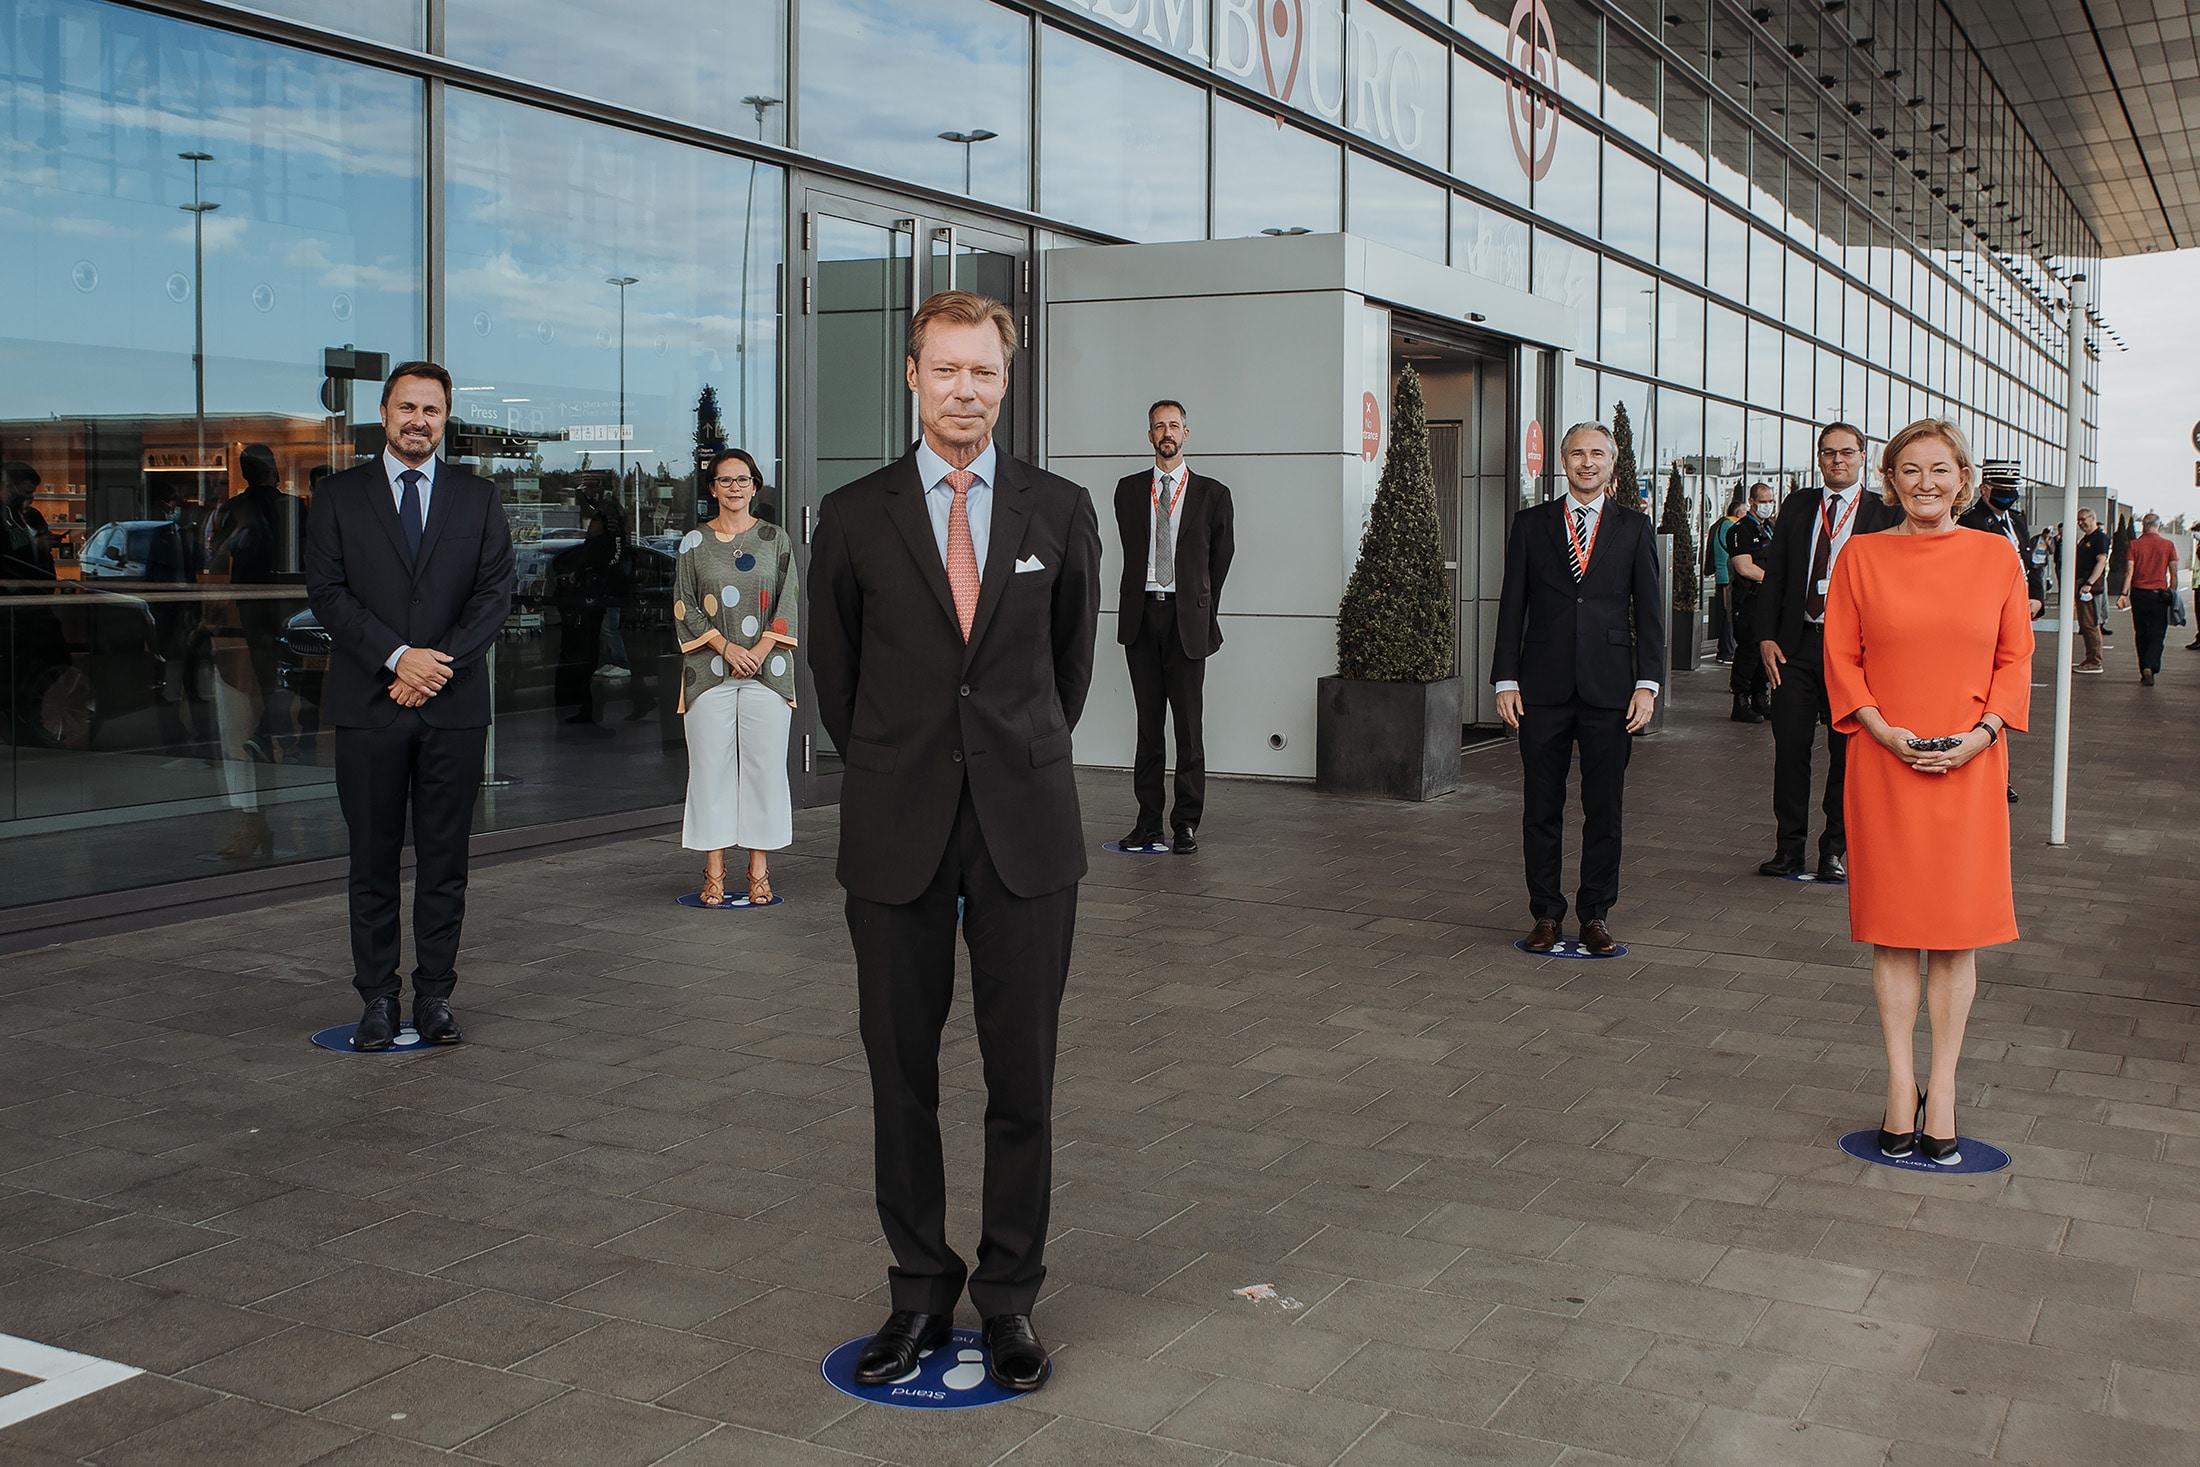 His Royal Highness, Grand Duke Henri Of Luxembourg Visited Together With Xavier Bettel And Paulette Lenert The Covid-19 Testing Station At Lux-Airport.© Cour Grand-Ducale / Kary Barthelmey